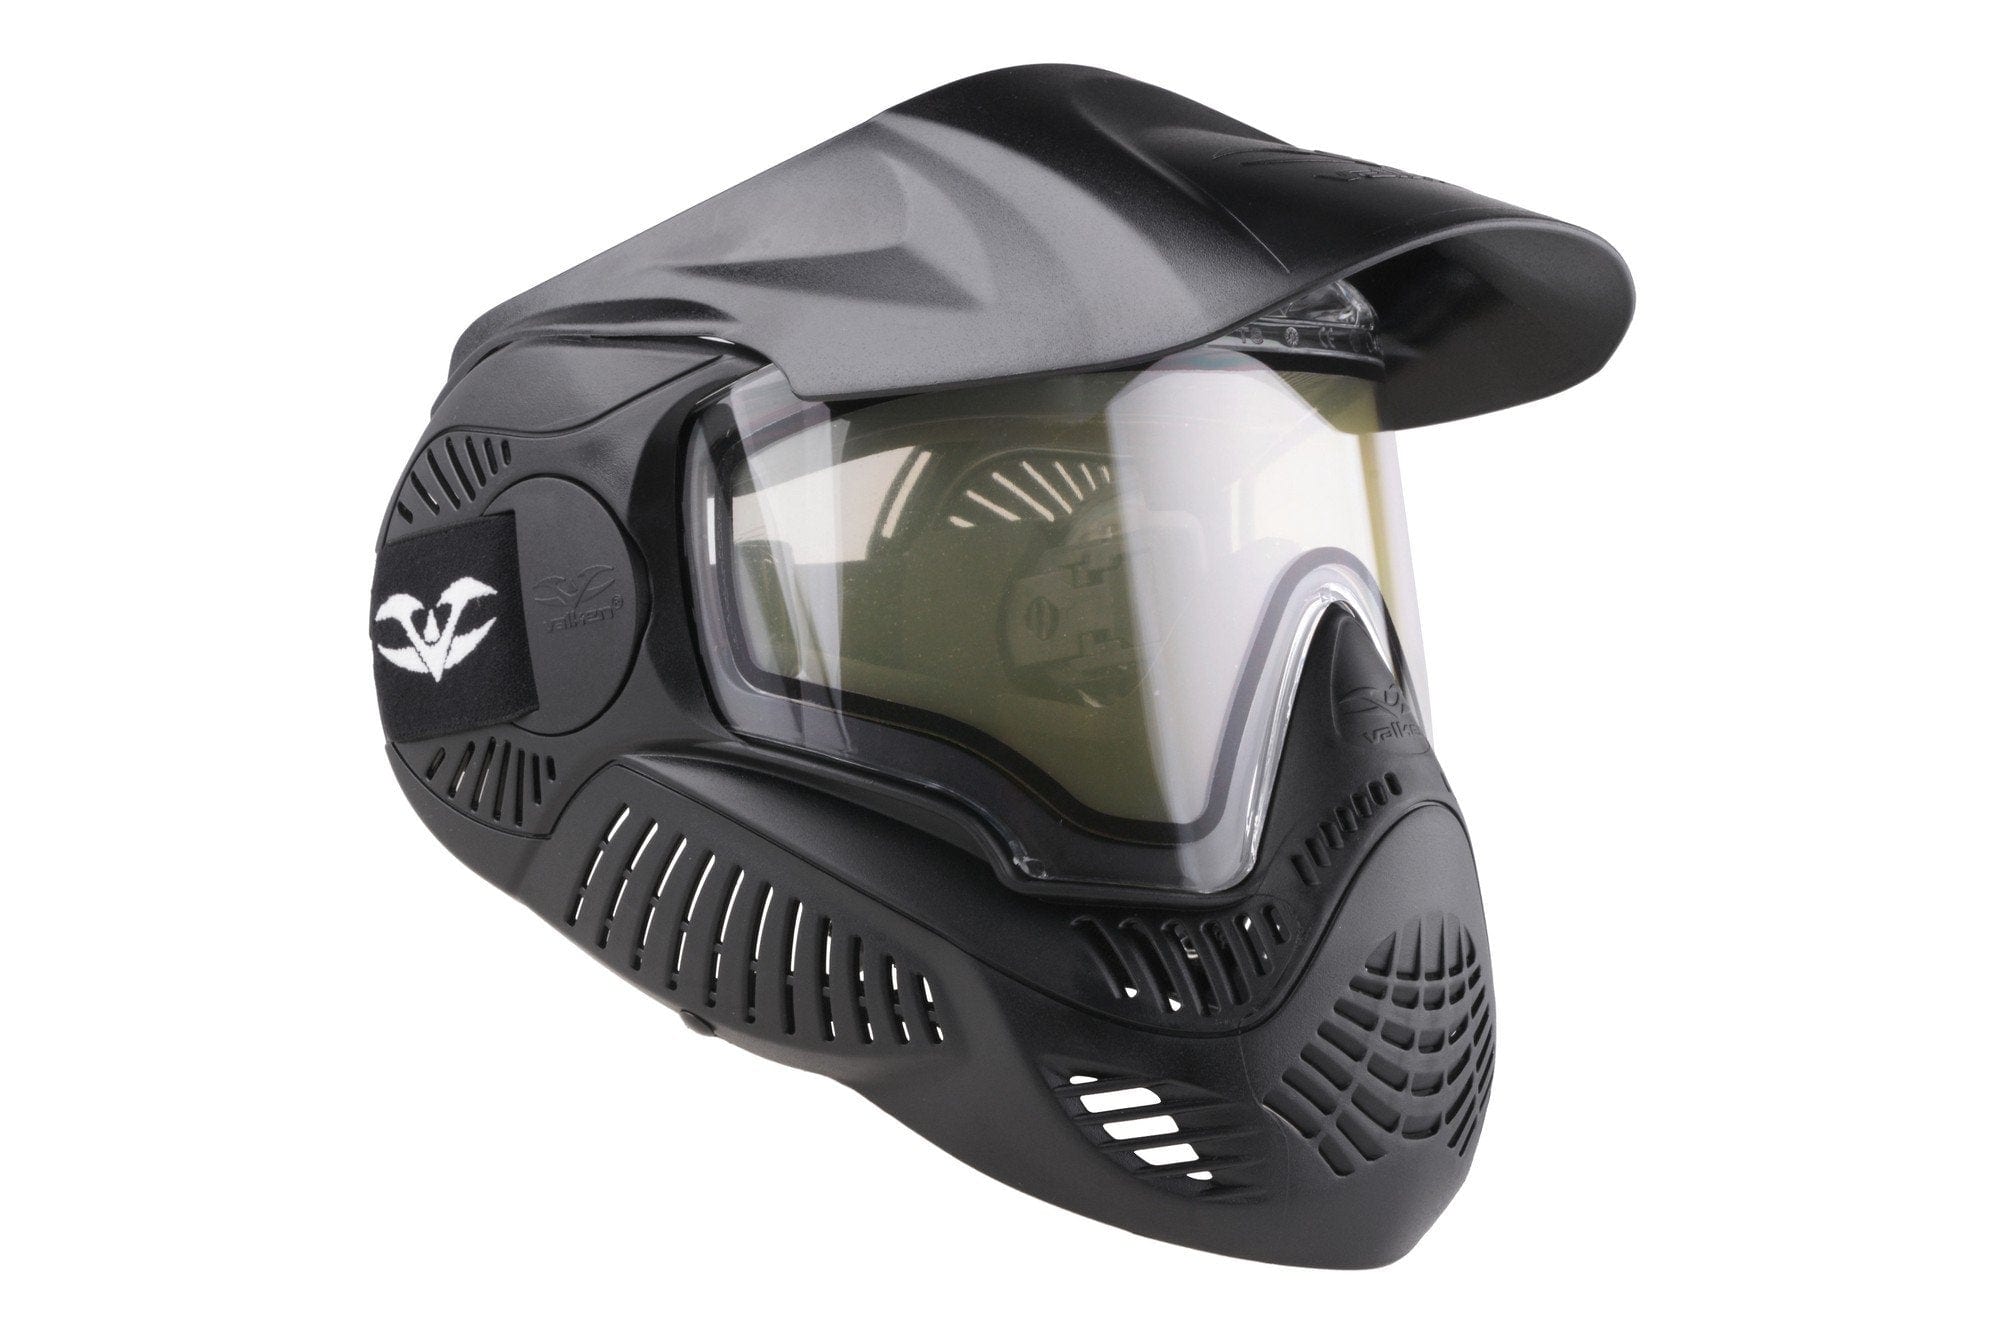 Annex MI-3 Field Thermal Protective Mask by Valken on Airsoft Mania Europe